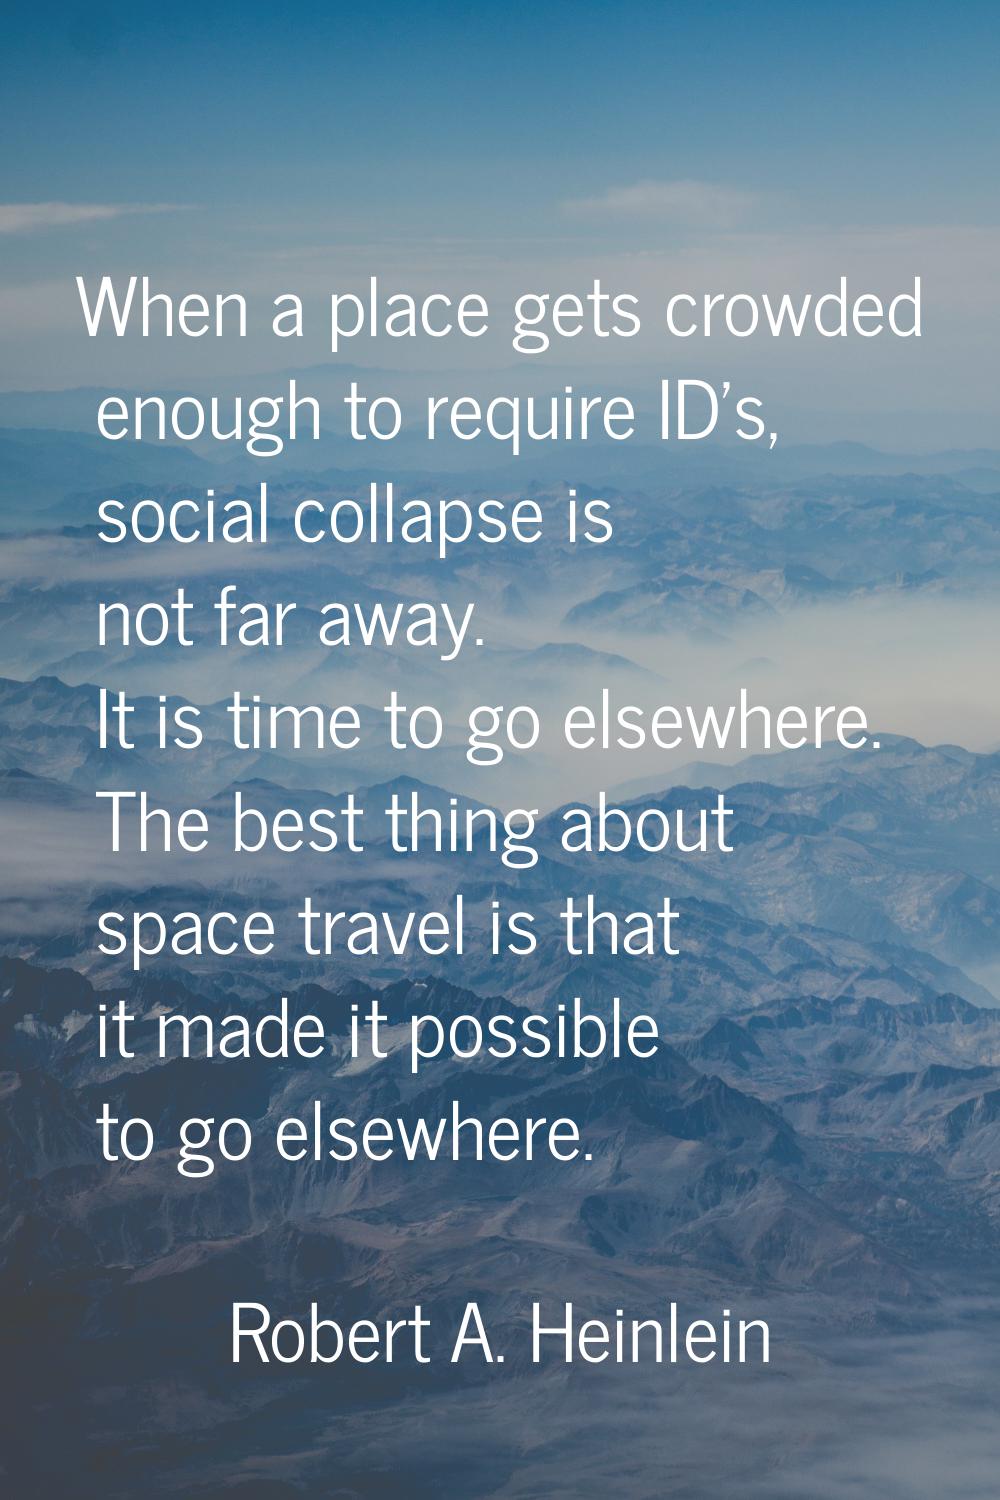 When a place gets crowded enough to require ID's, social collapse is not far away. It is time to go